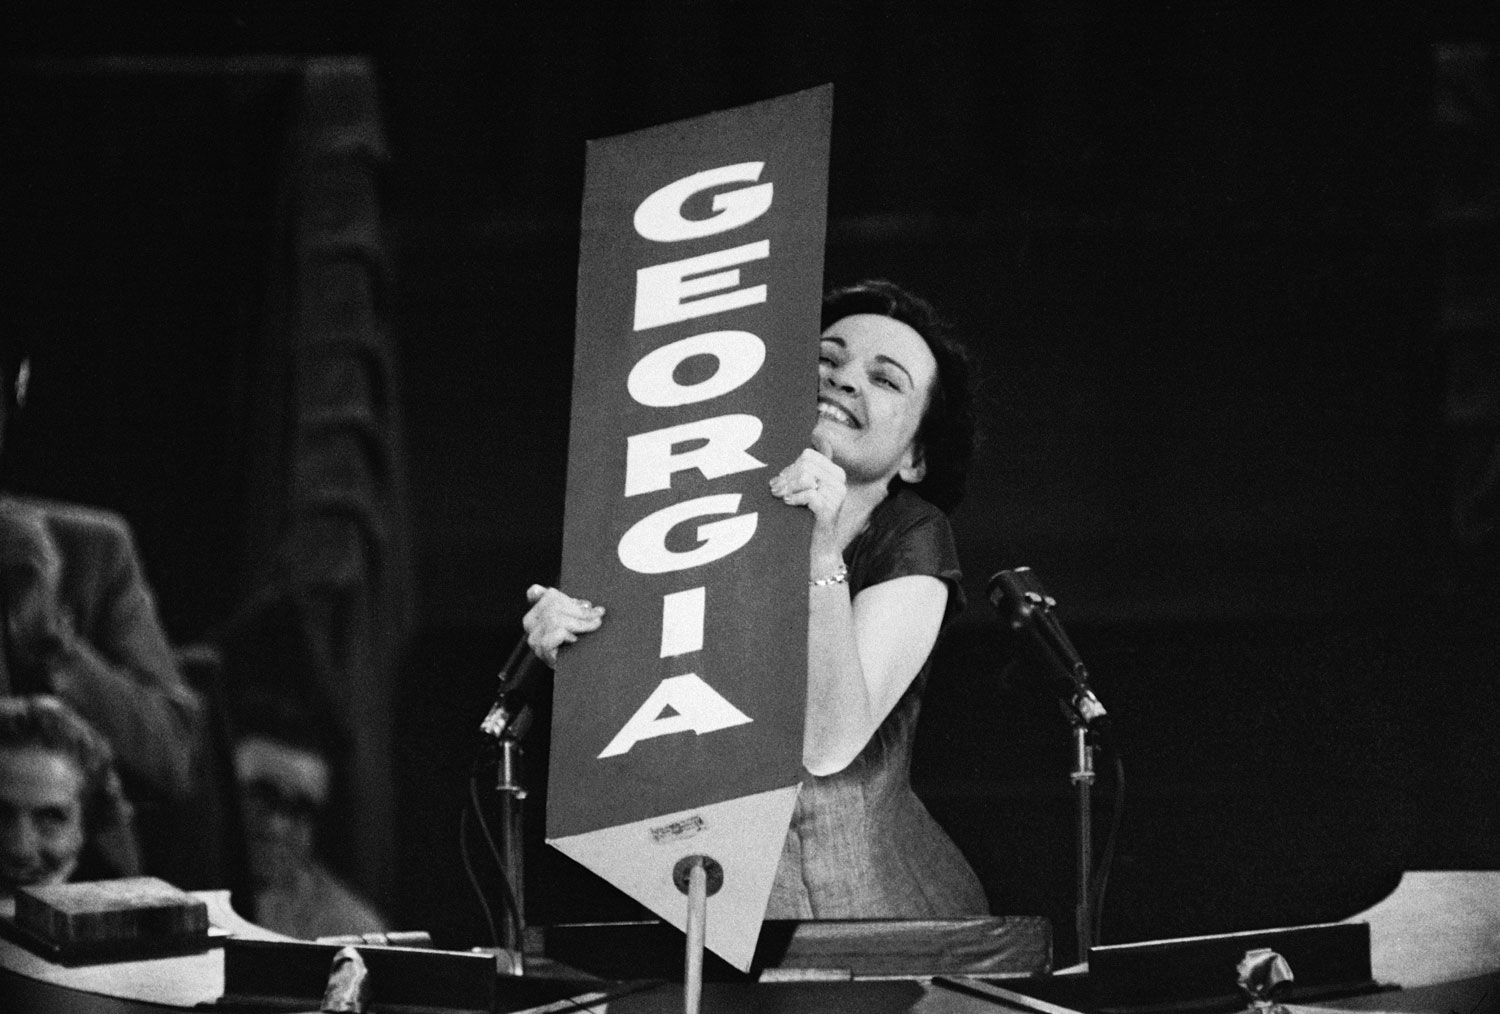 Georgia Congresswoman Iris Blitch, a staunch segregationist during her time in Congress, being saluted by her state's delegates before her speech at the 1956 Democratic National Convention in Chicago.